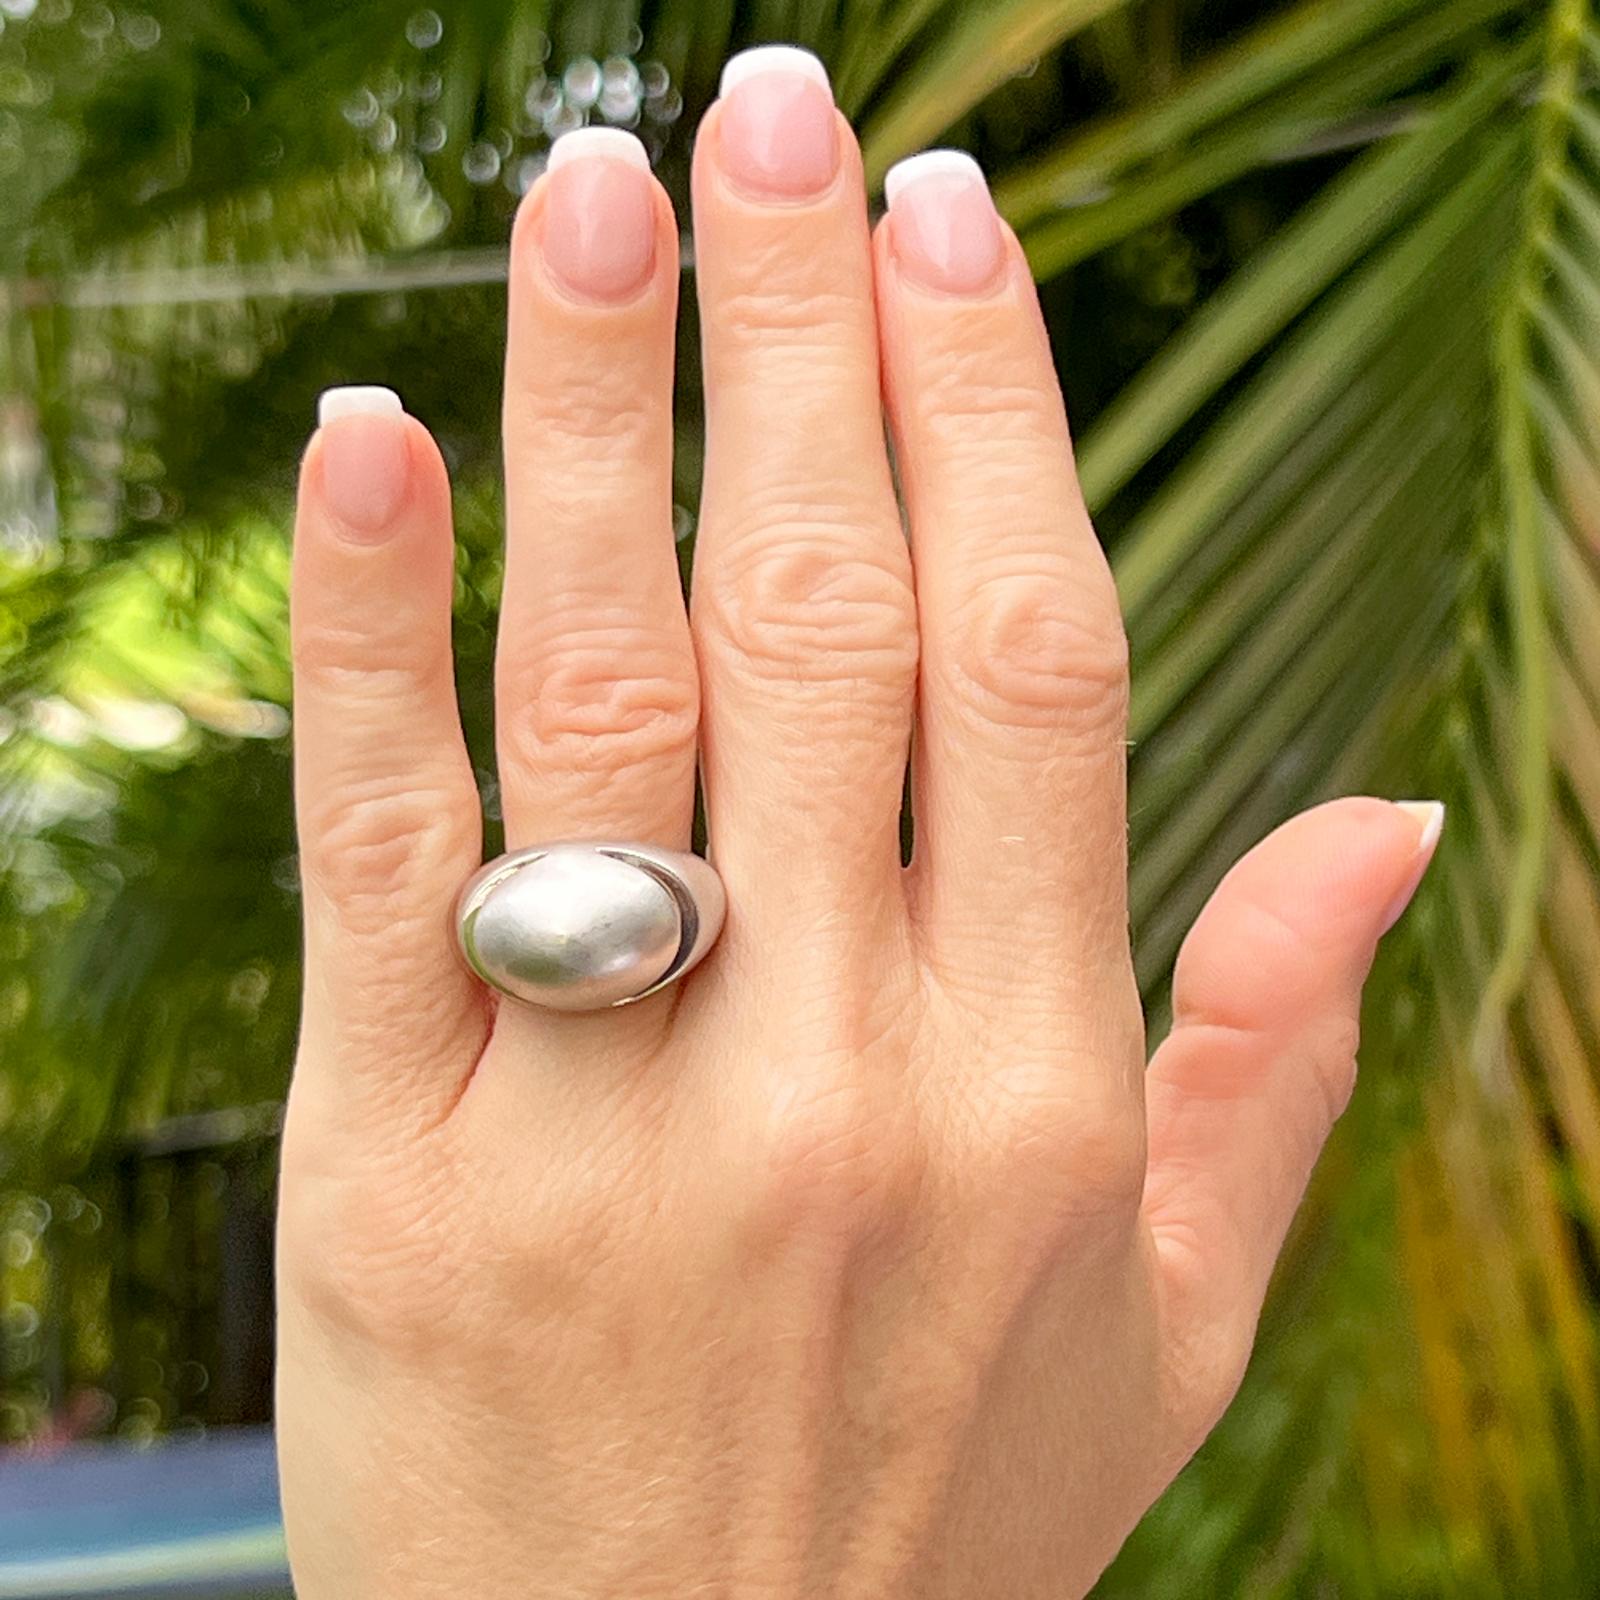 Sleek and simple designed dome ring by Bvlgari. The ring is fashioned in 18 karat brushed finish white gold. Domed on top with two cut outs to add dimension, the wide shank tapers from 14.5mm to 3.5mm. The ring is size 52 (US size 6). 